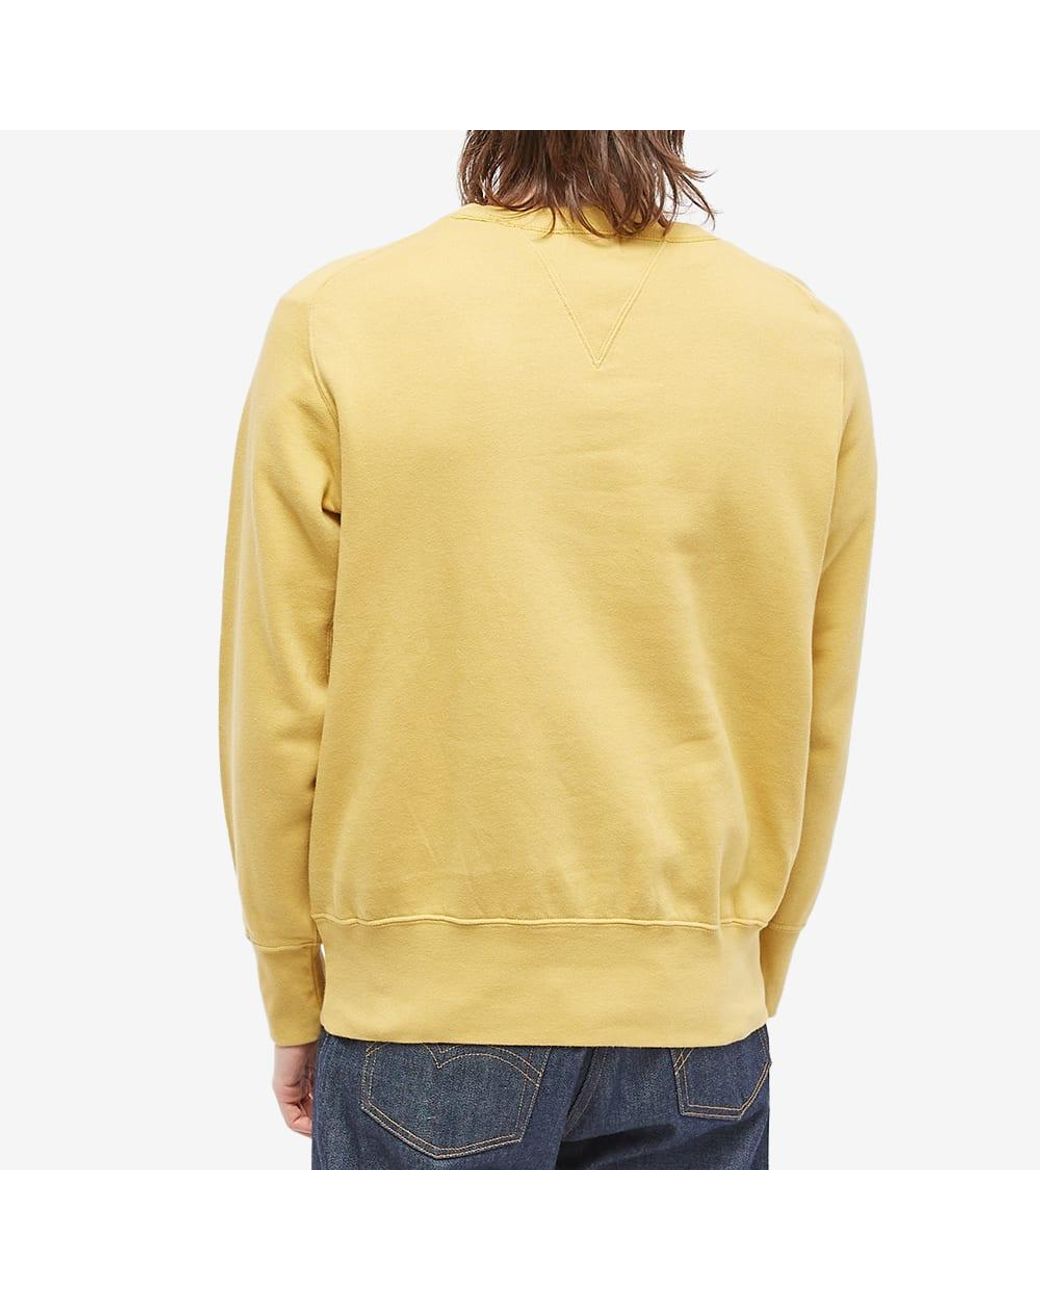 Levi's Vintage Clothing Bay Meadows Sweatshirt in Yellow for Men | Lyst